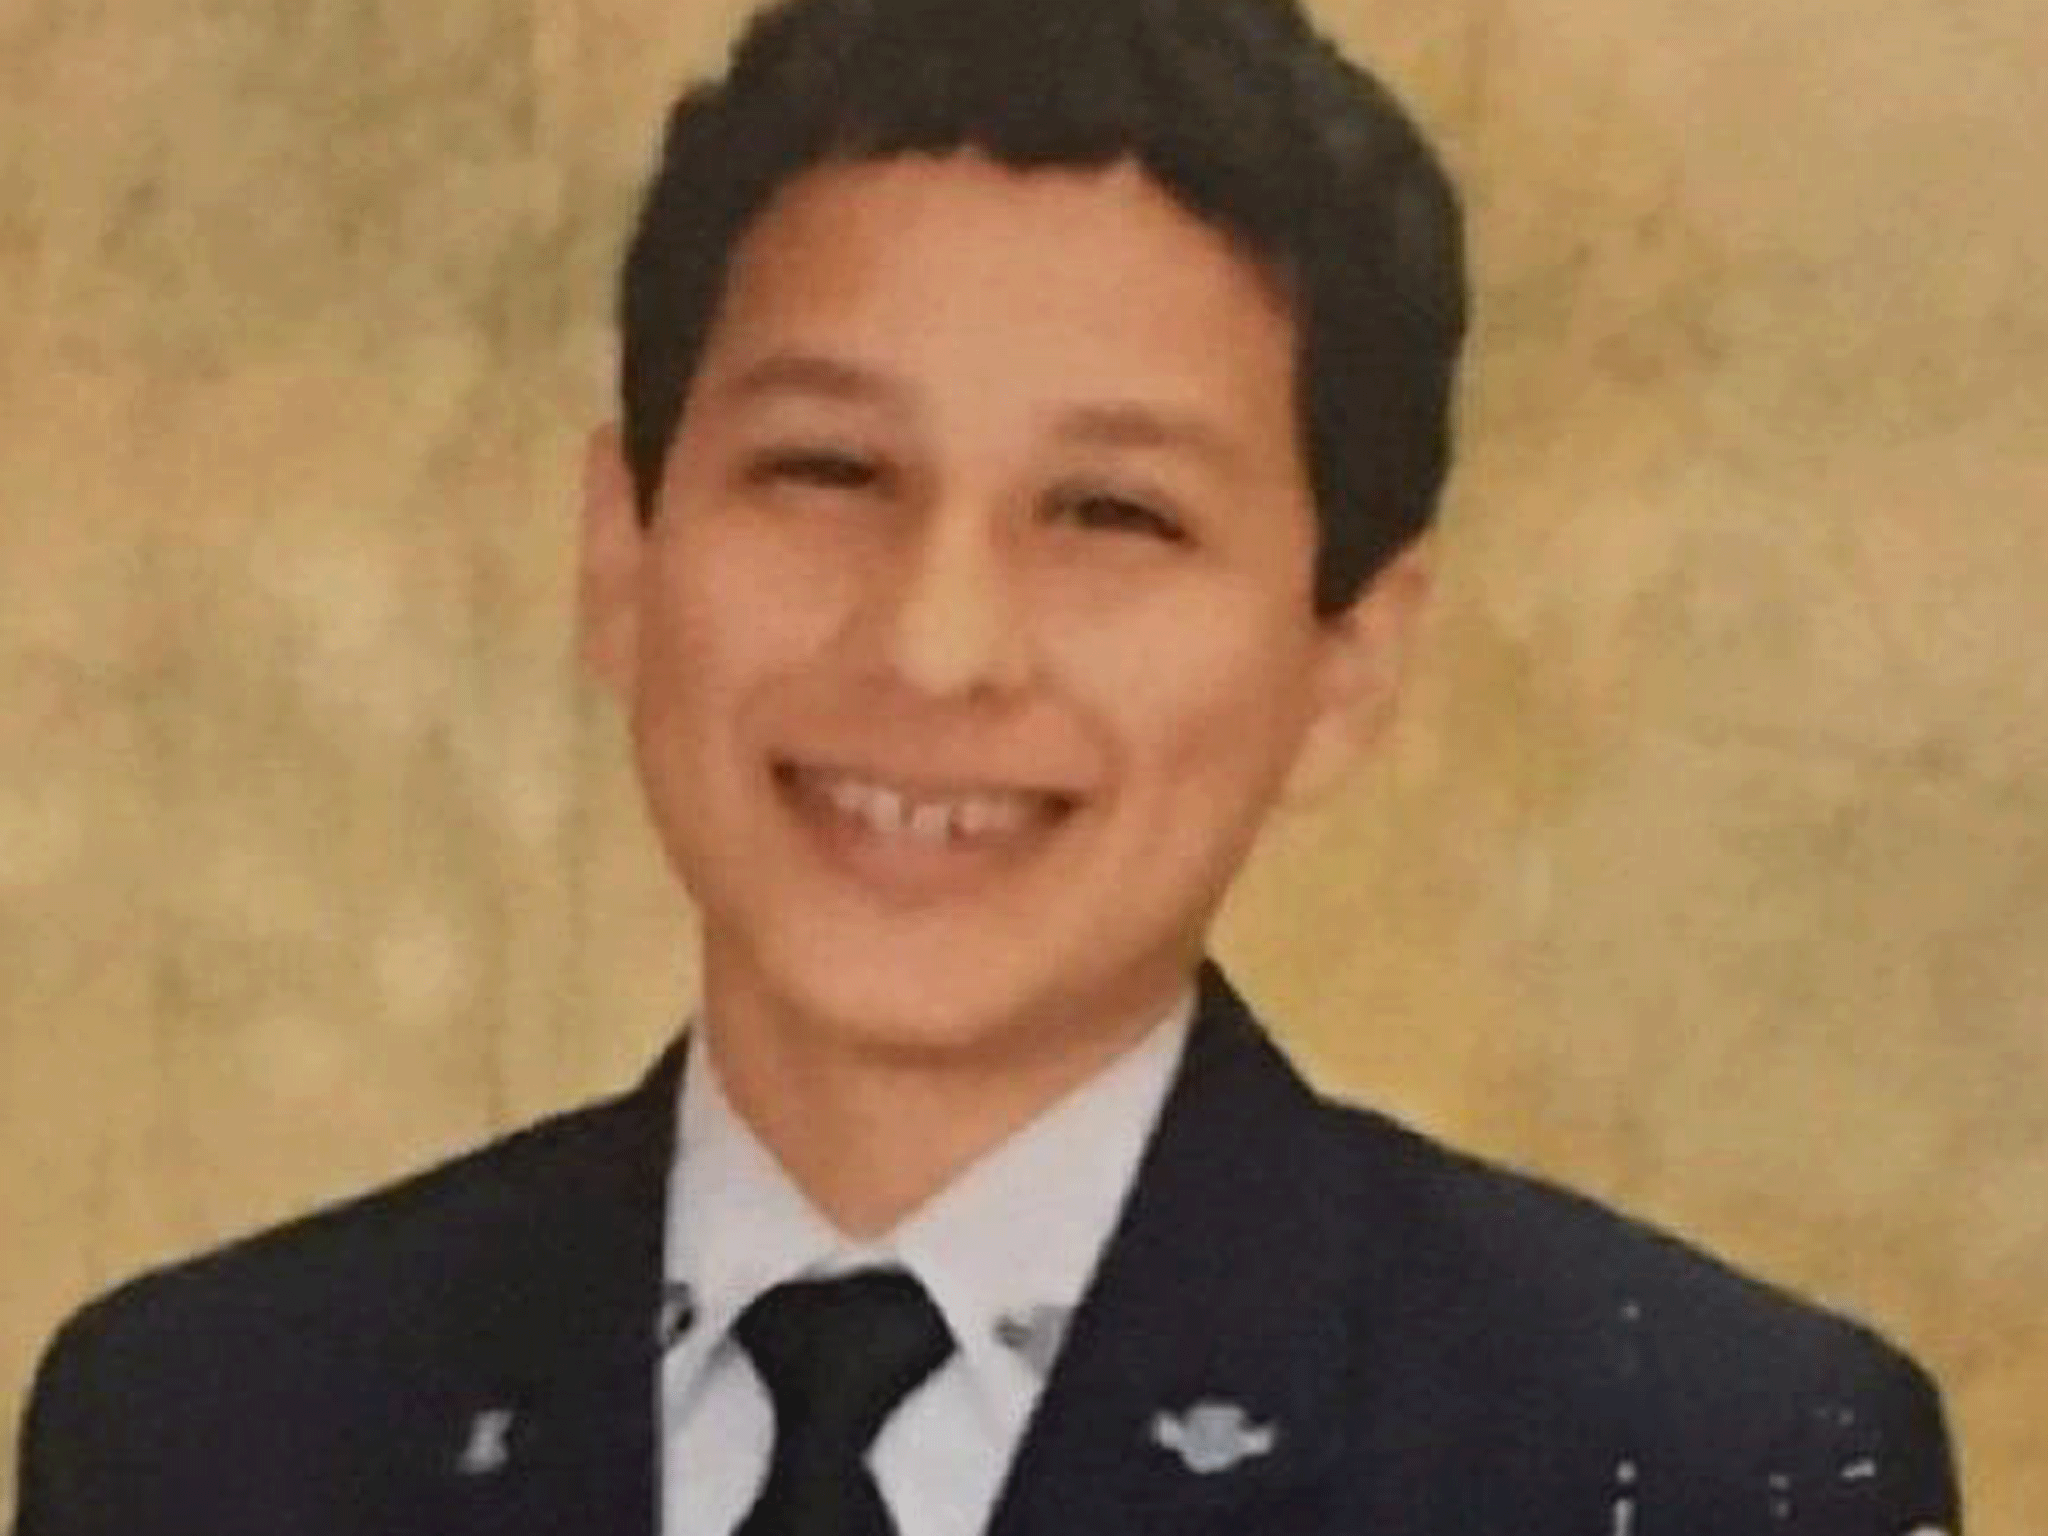 The family of Isaiah Gonzales say he died after participating in an online game called the Blue Whale challenge